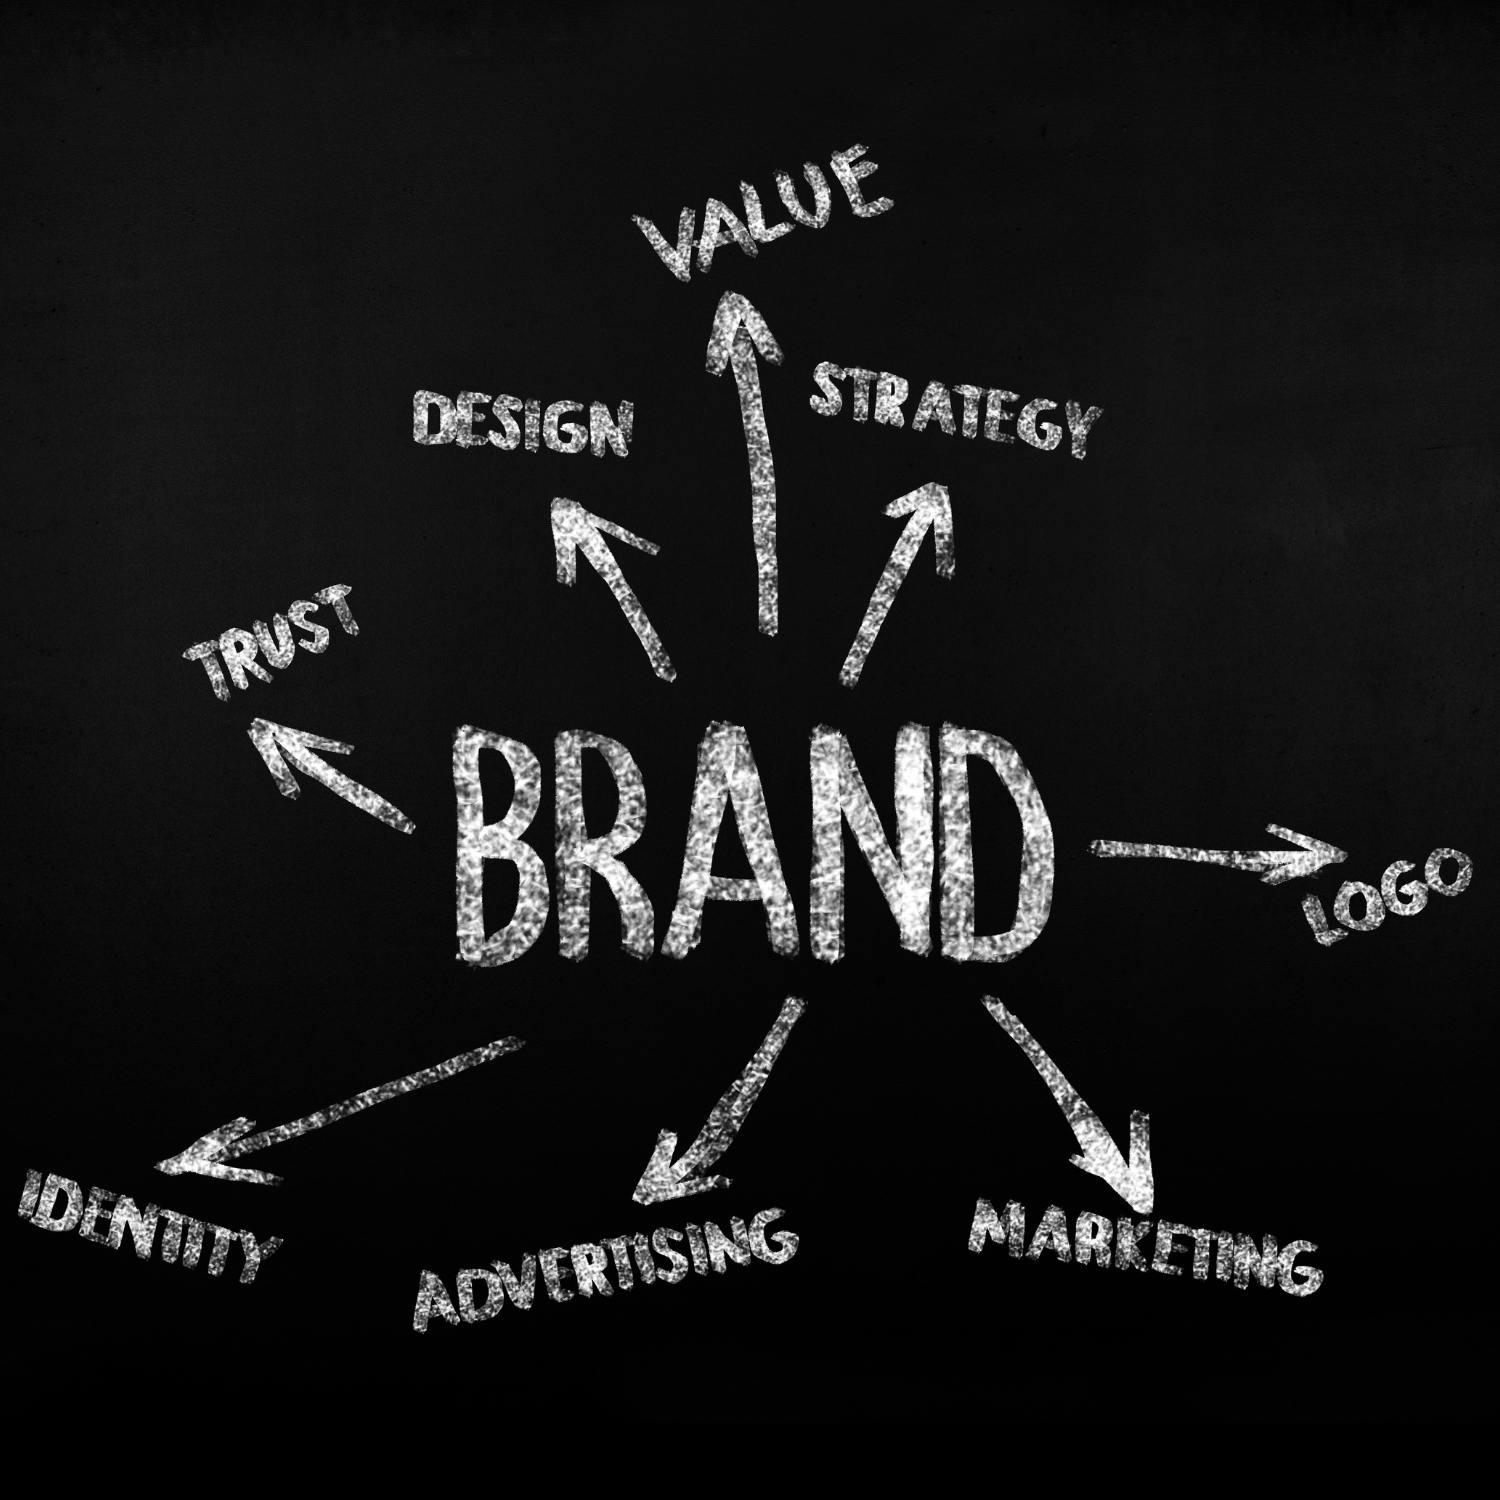 How To Build a Personal Brand, Made Easy